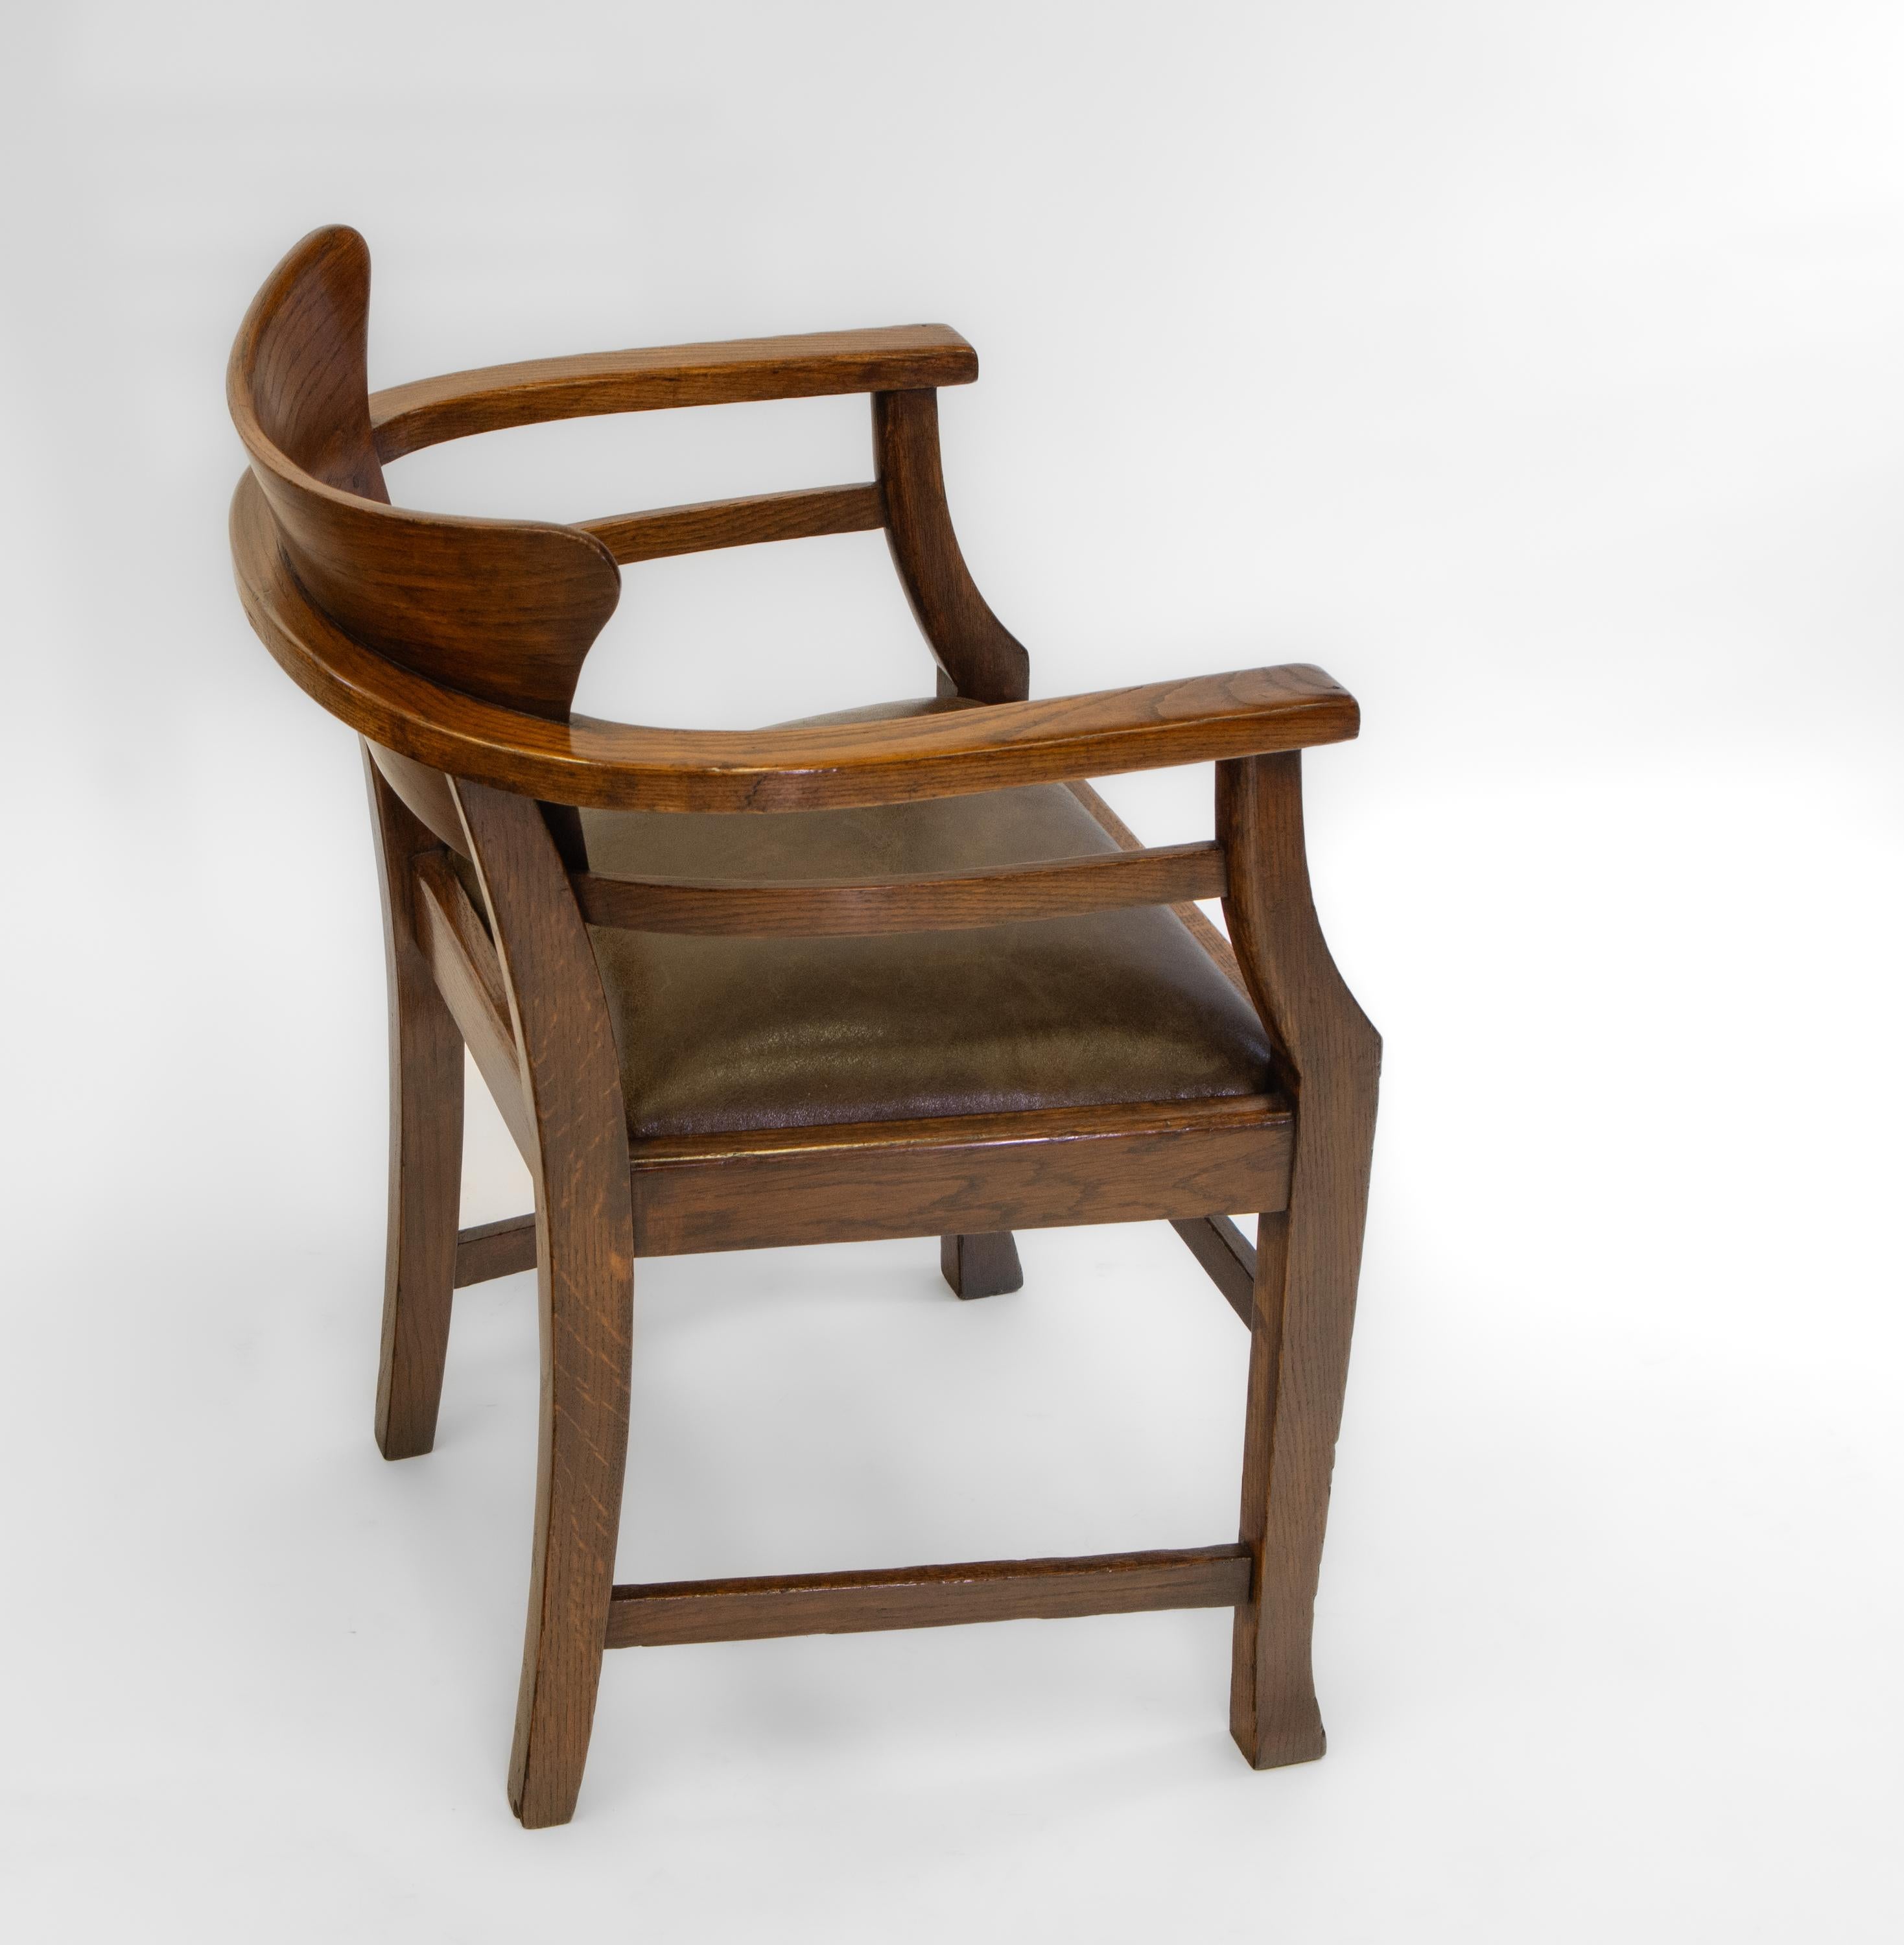 20th Century Art & Crafts Oak and Leather Office Chair In The Richard Riemerschmid Manner 2 For Sale